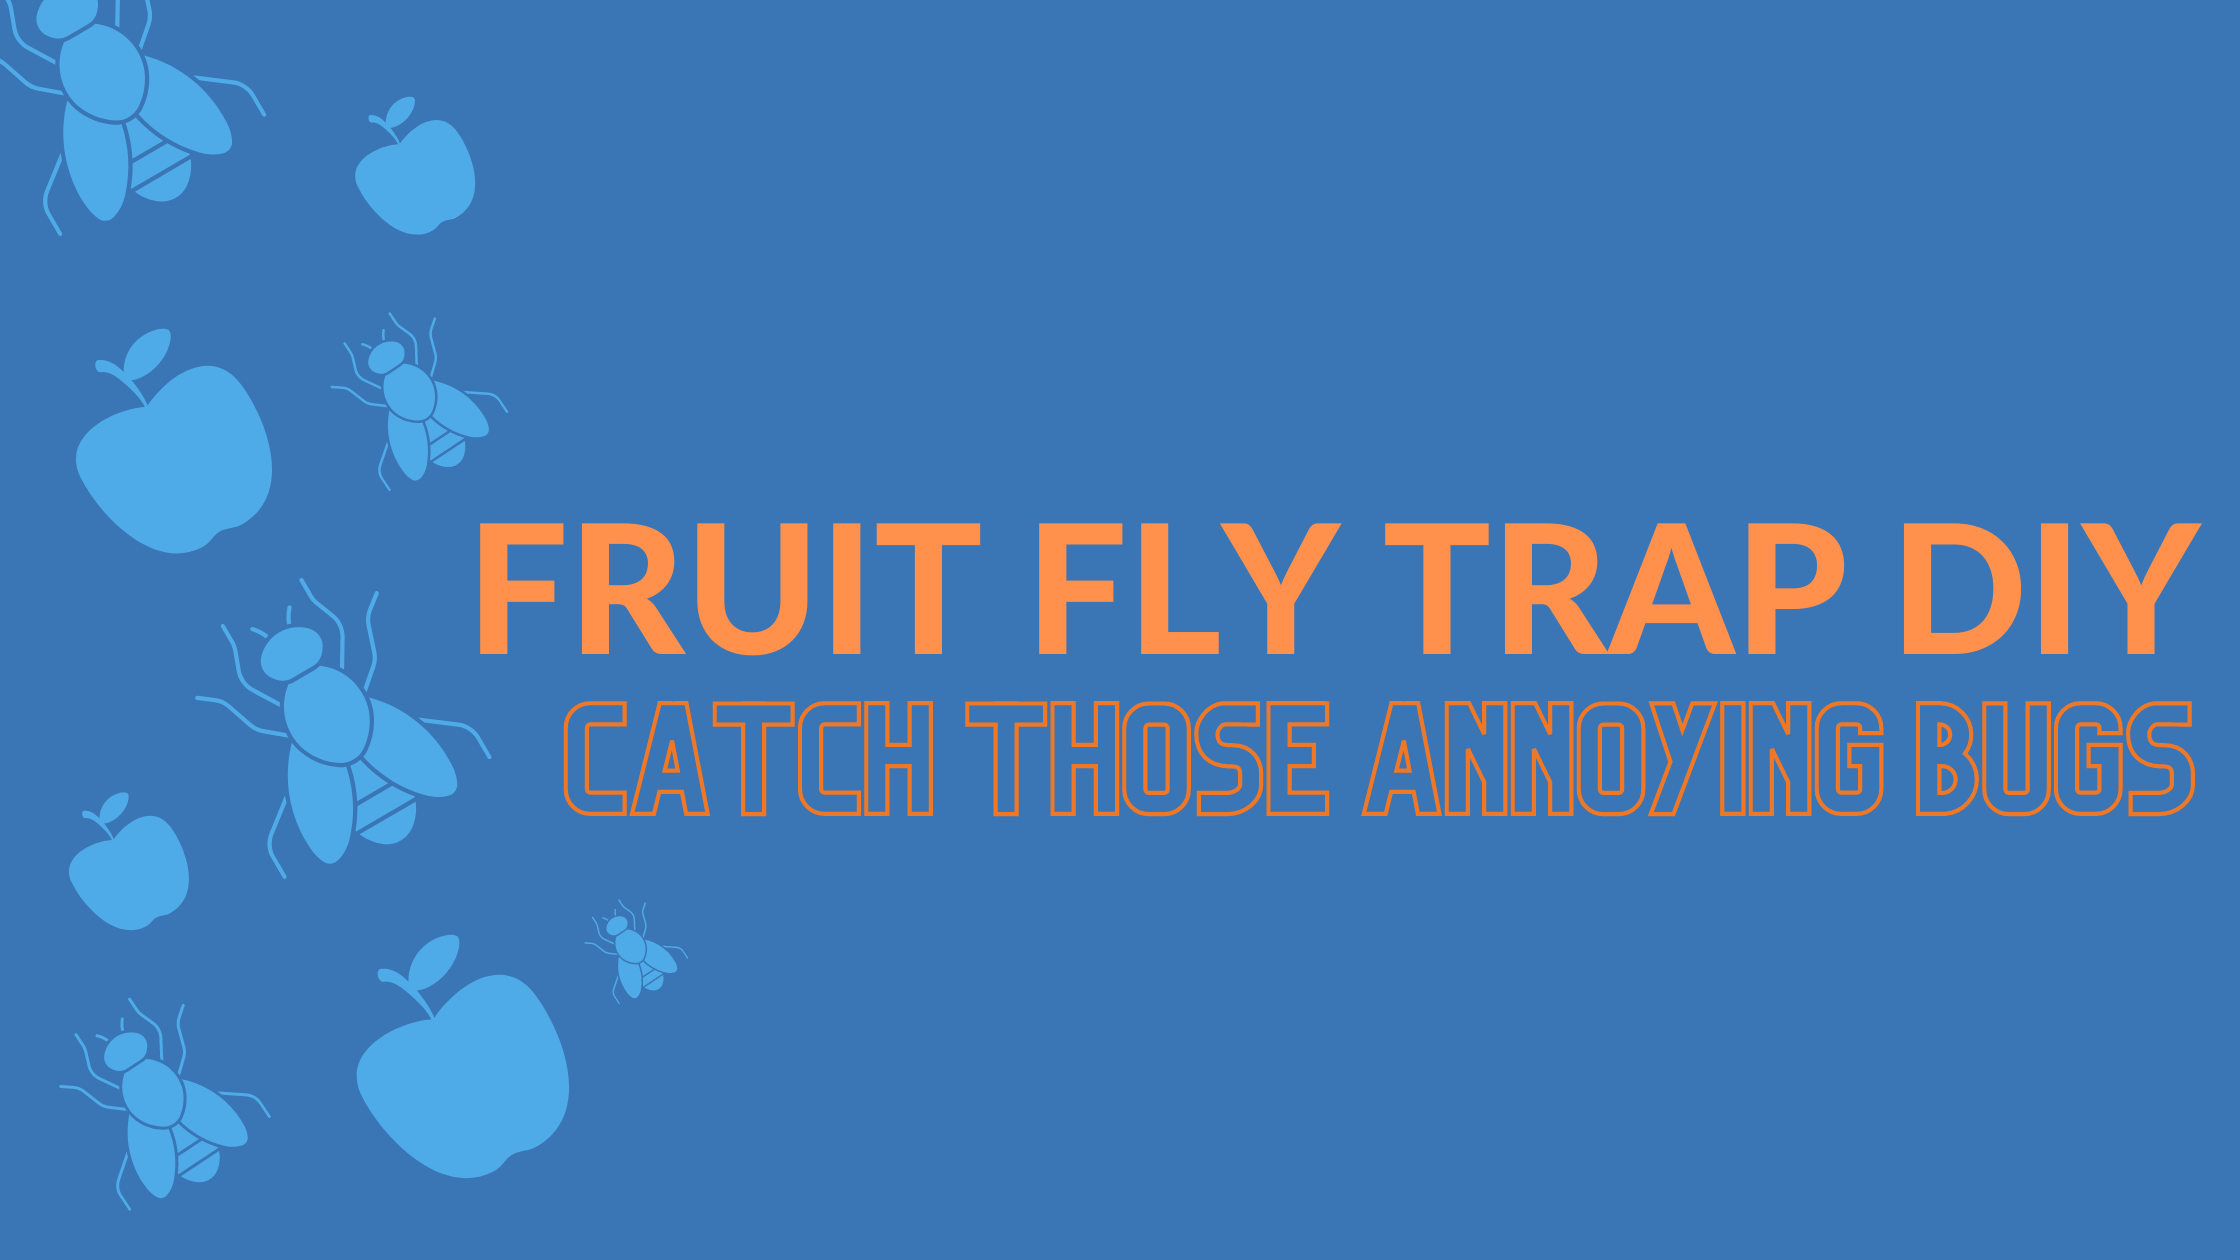 https://go2-pros.com/wp-content/uploads/2022/01/Fruit-Fly-Trap-DIY-For-Catching-Those-Annoying-Sneaky-Bugs-1.png